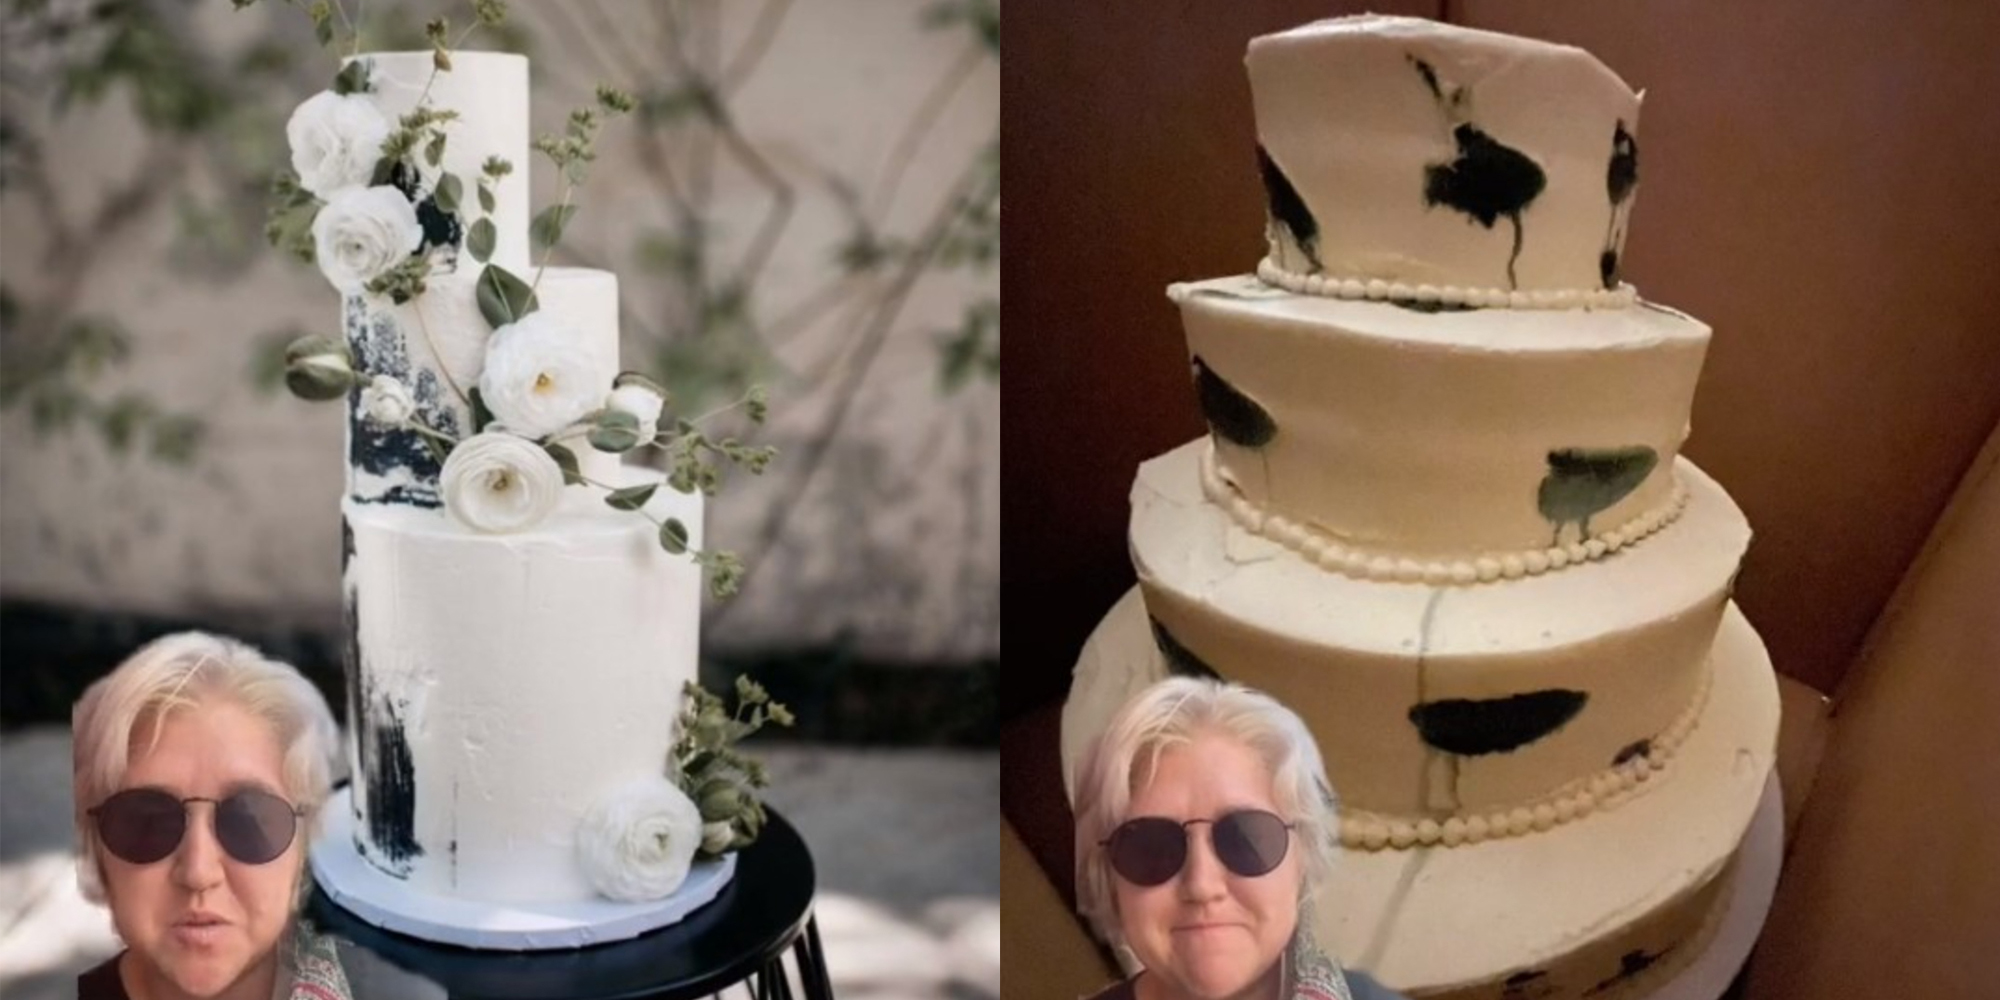 Baker shares ultimate wedding cake fail after spending 10 hours cooking  only for it to end in disaster | The Sun